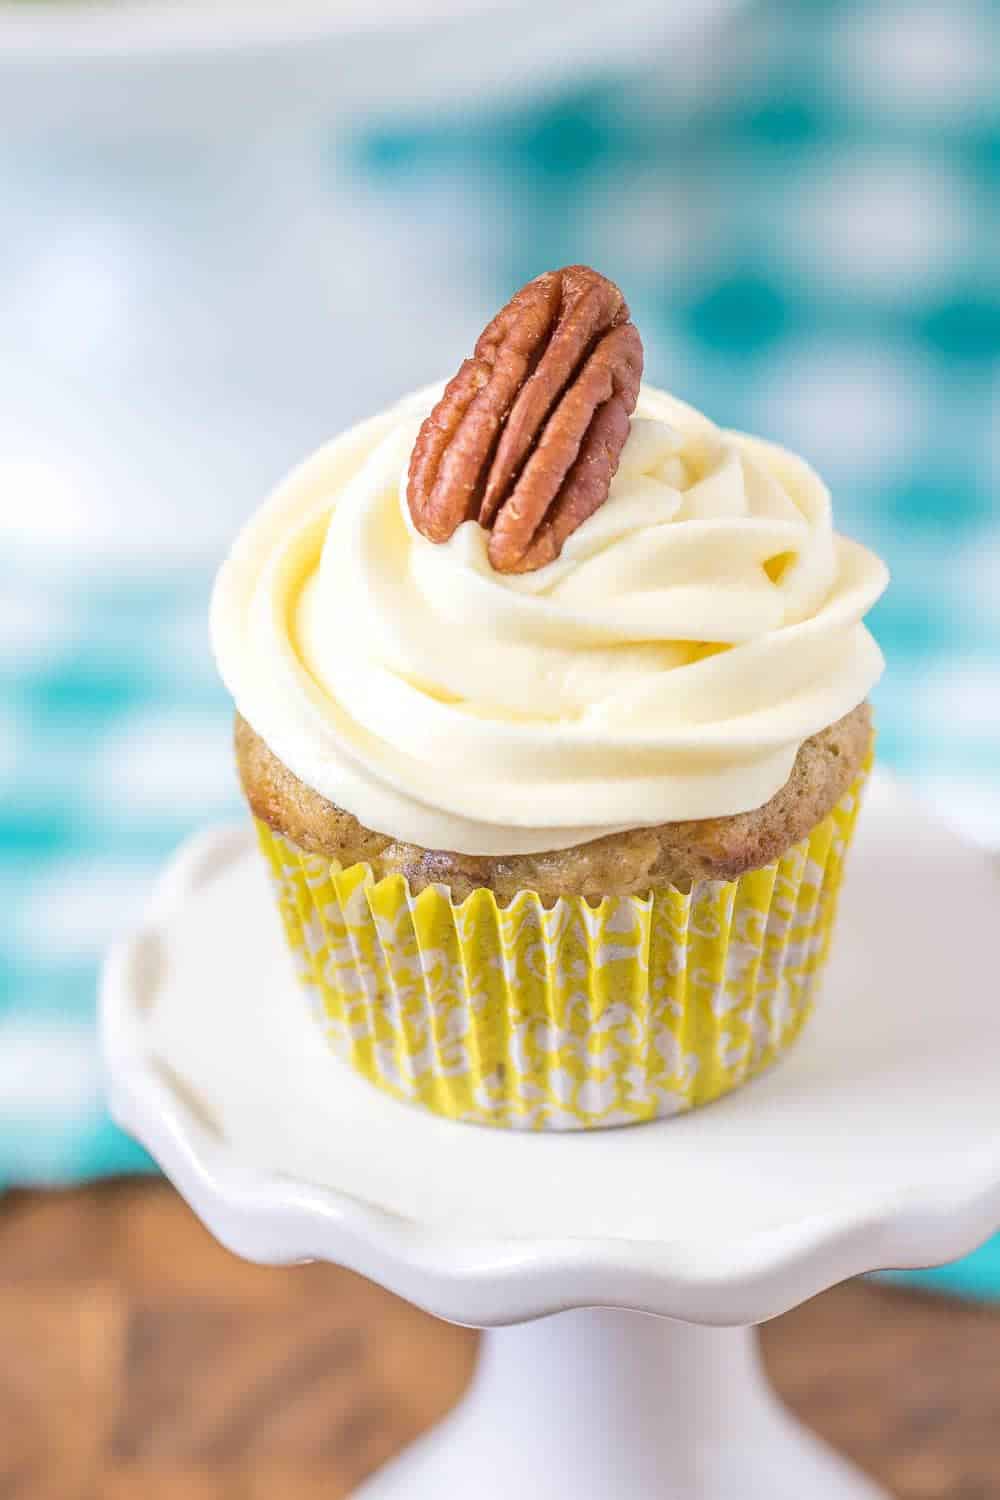 Hummingbird cupcakes are a classic Southern dessert. Filled with fruit and nuts, these party-ready cupcakes will make everyone hum with excitement!